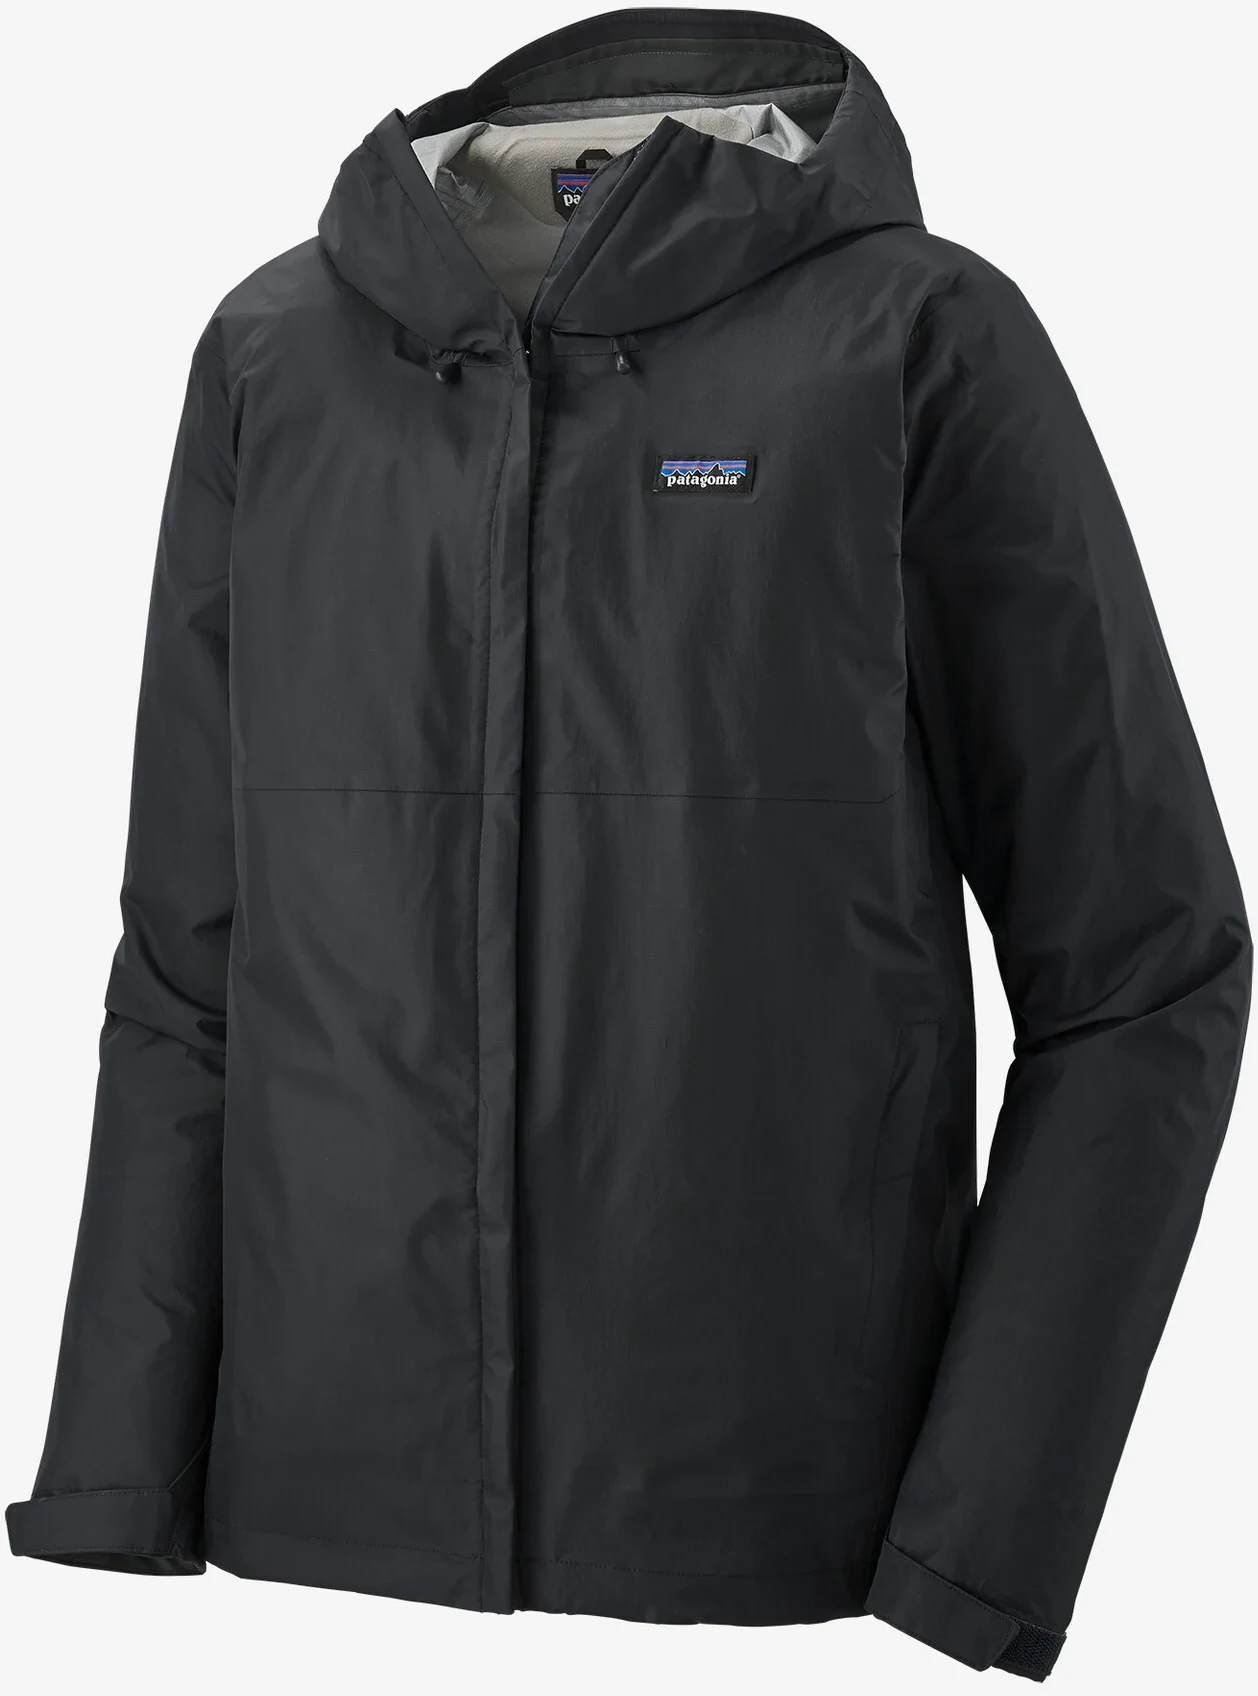 Unlock Wilderness' choice in the Mountain Hardwear Vs Patagonia comparison, the Torrentshell 3L Jacket by Patagonia